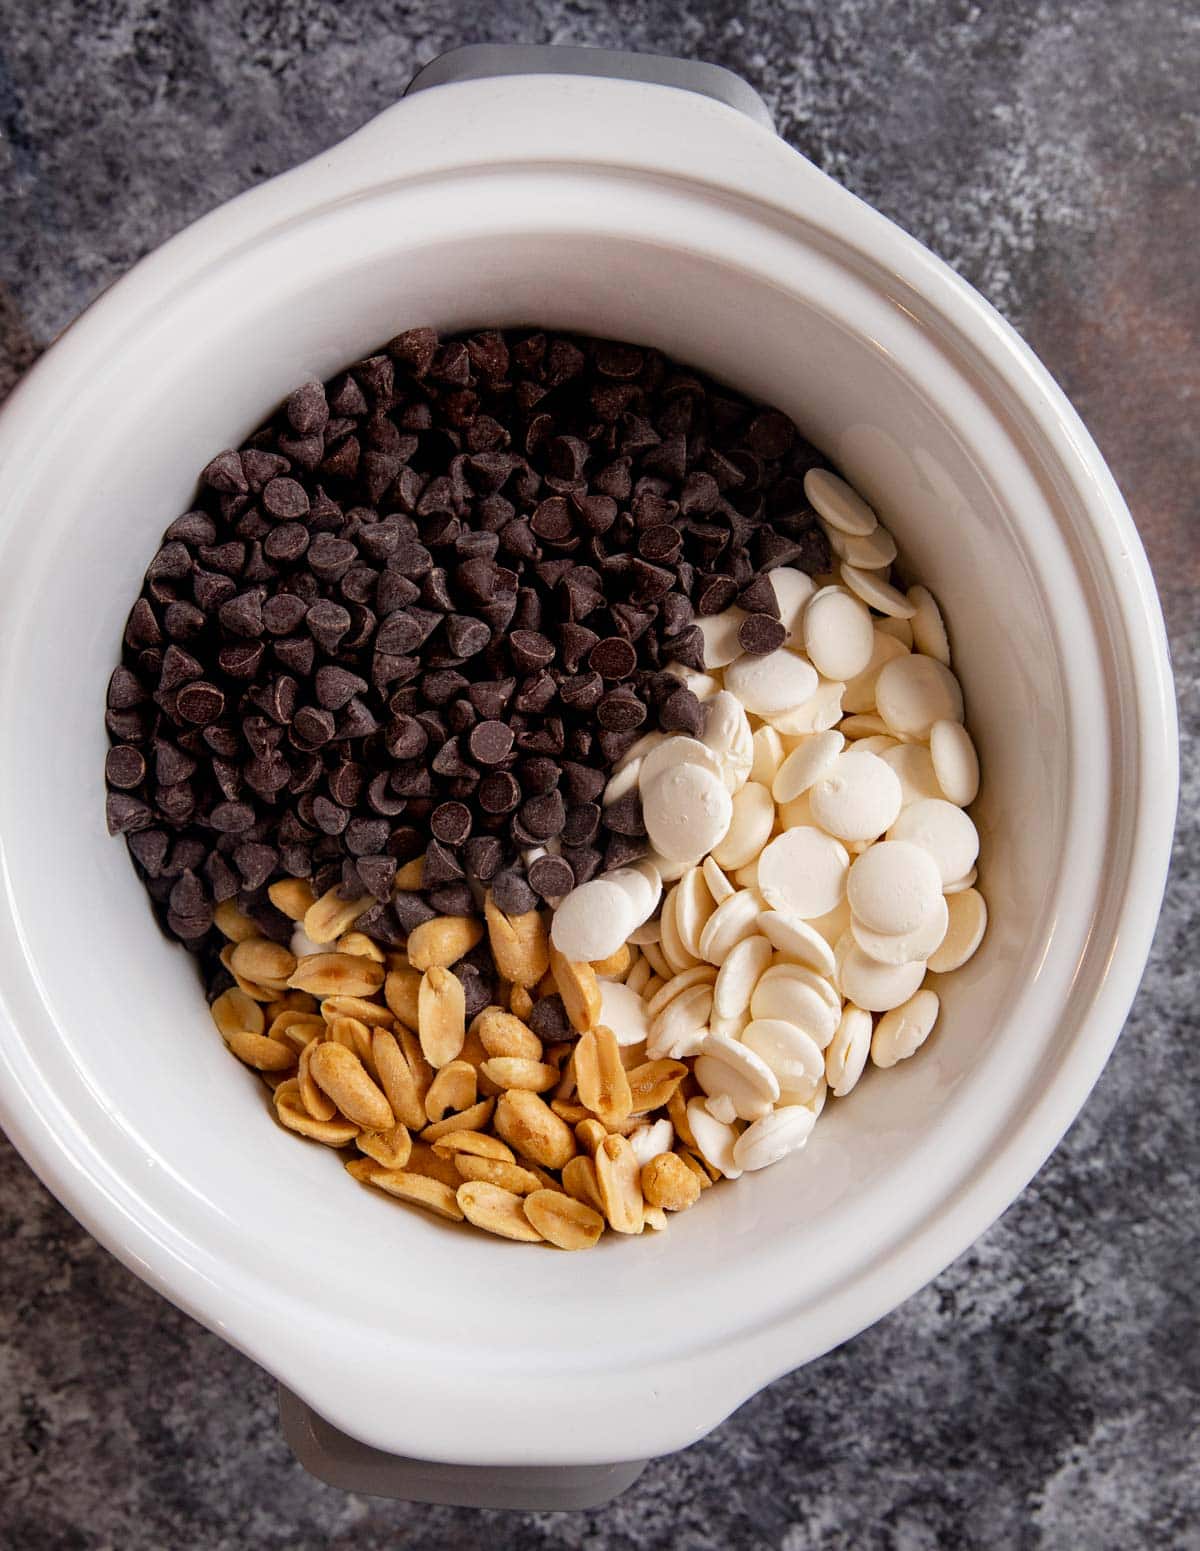 Slow Cooker Chocolate Candy ingredients in crockpot